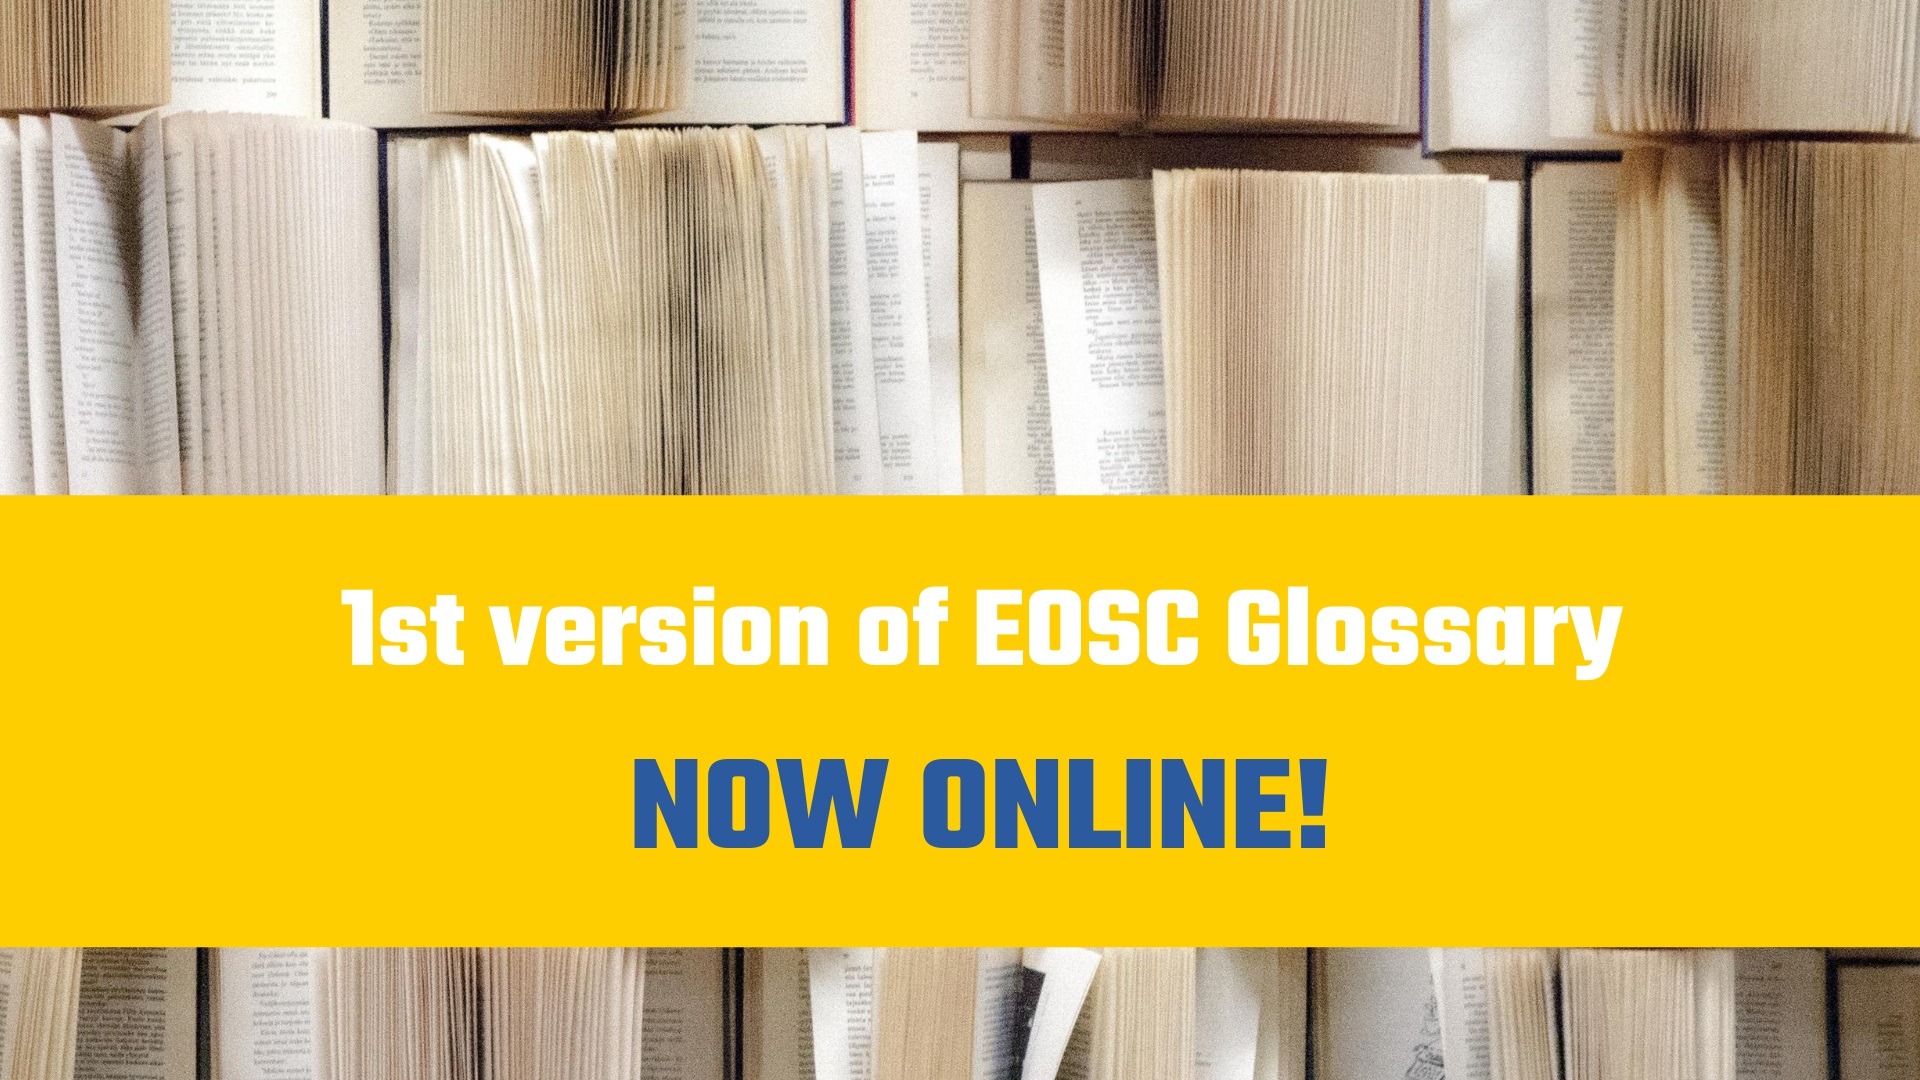 1st version of EOSC Glossary now online!